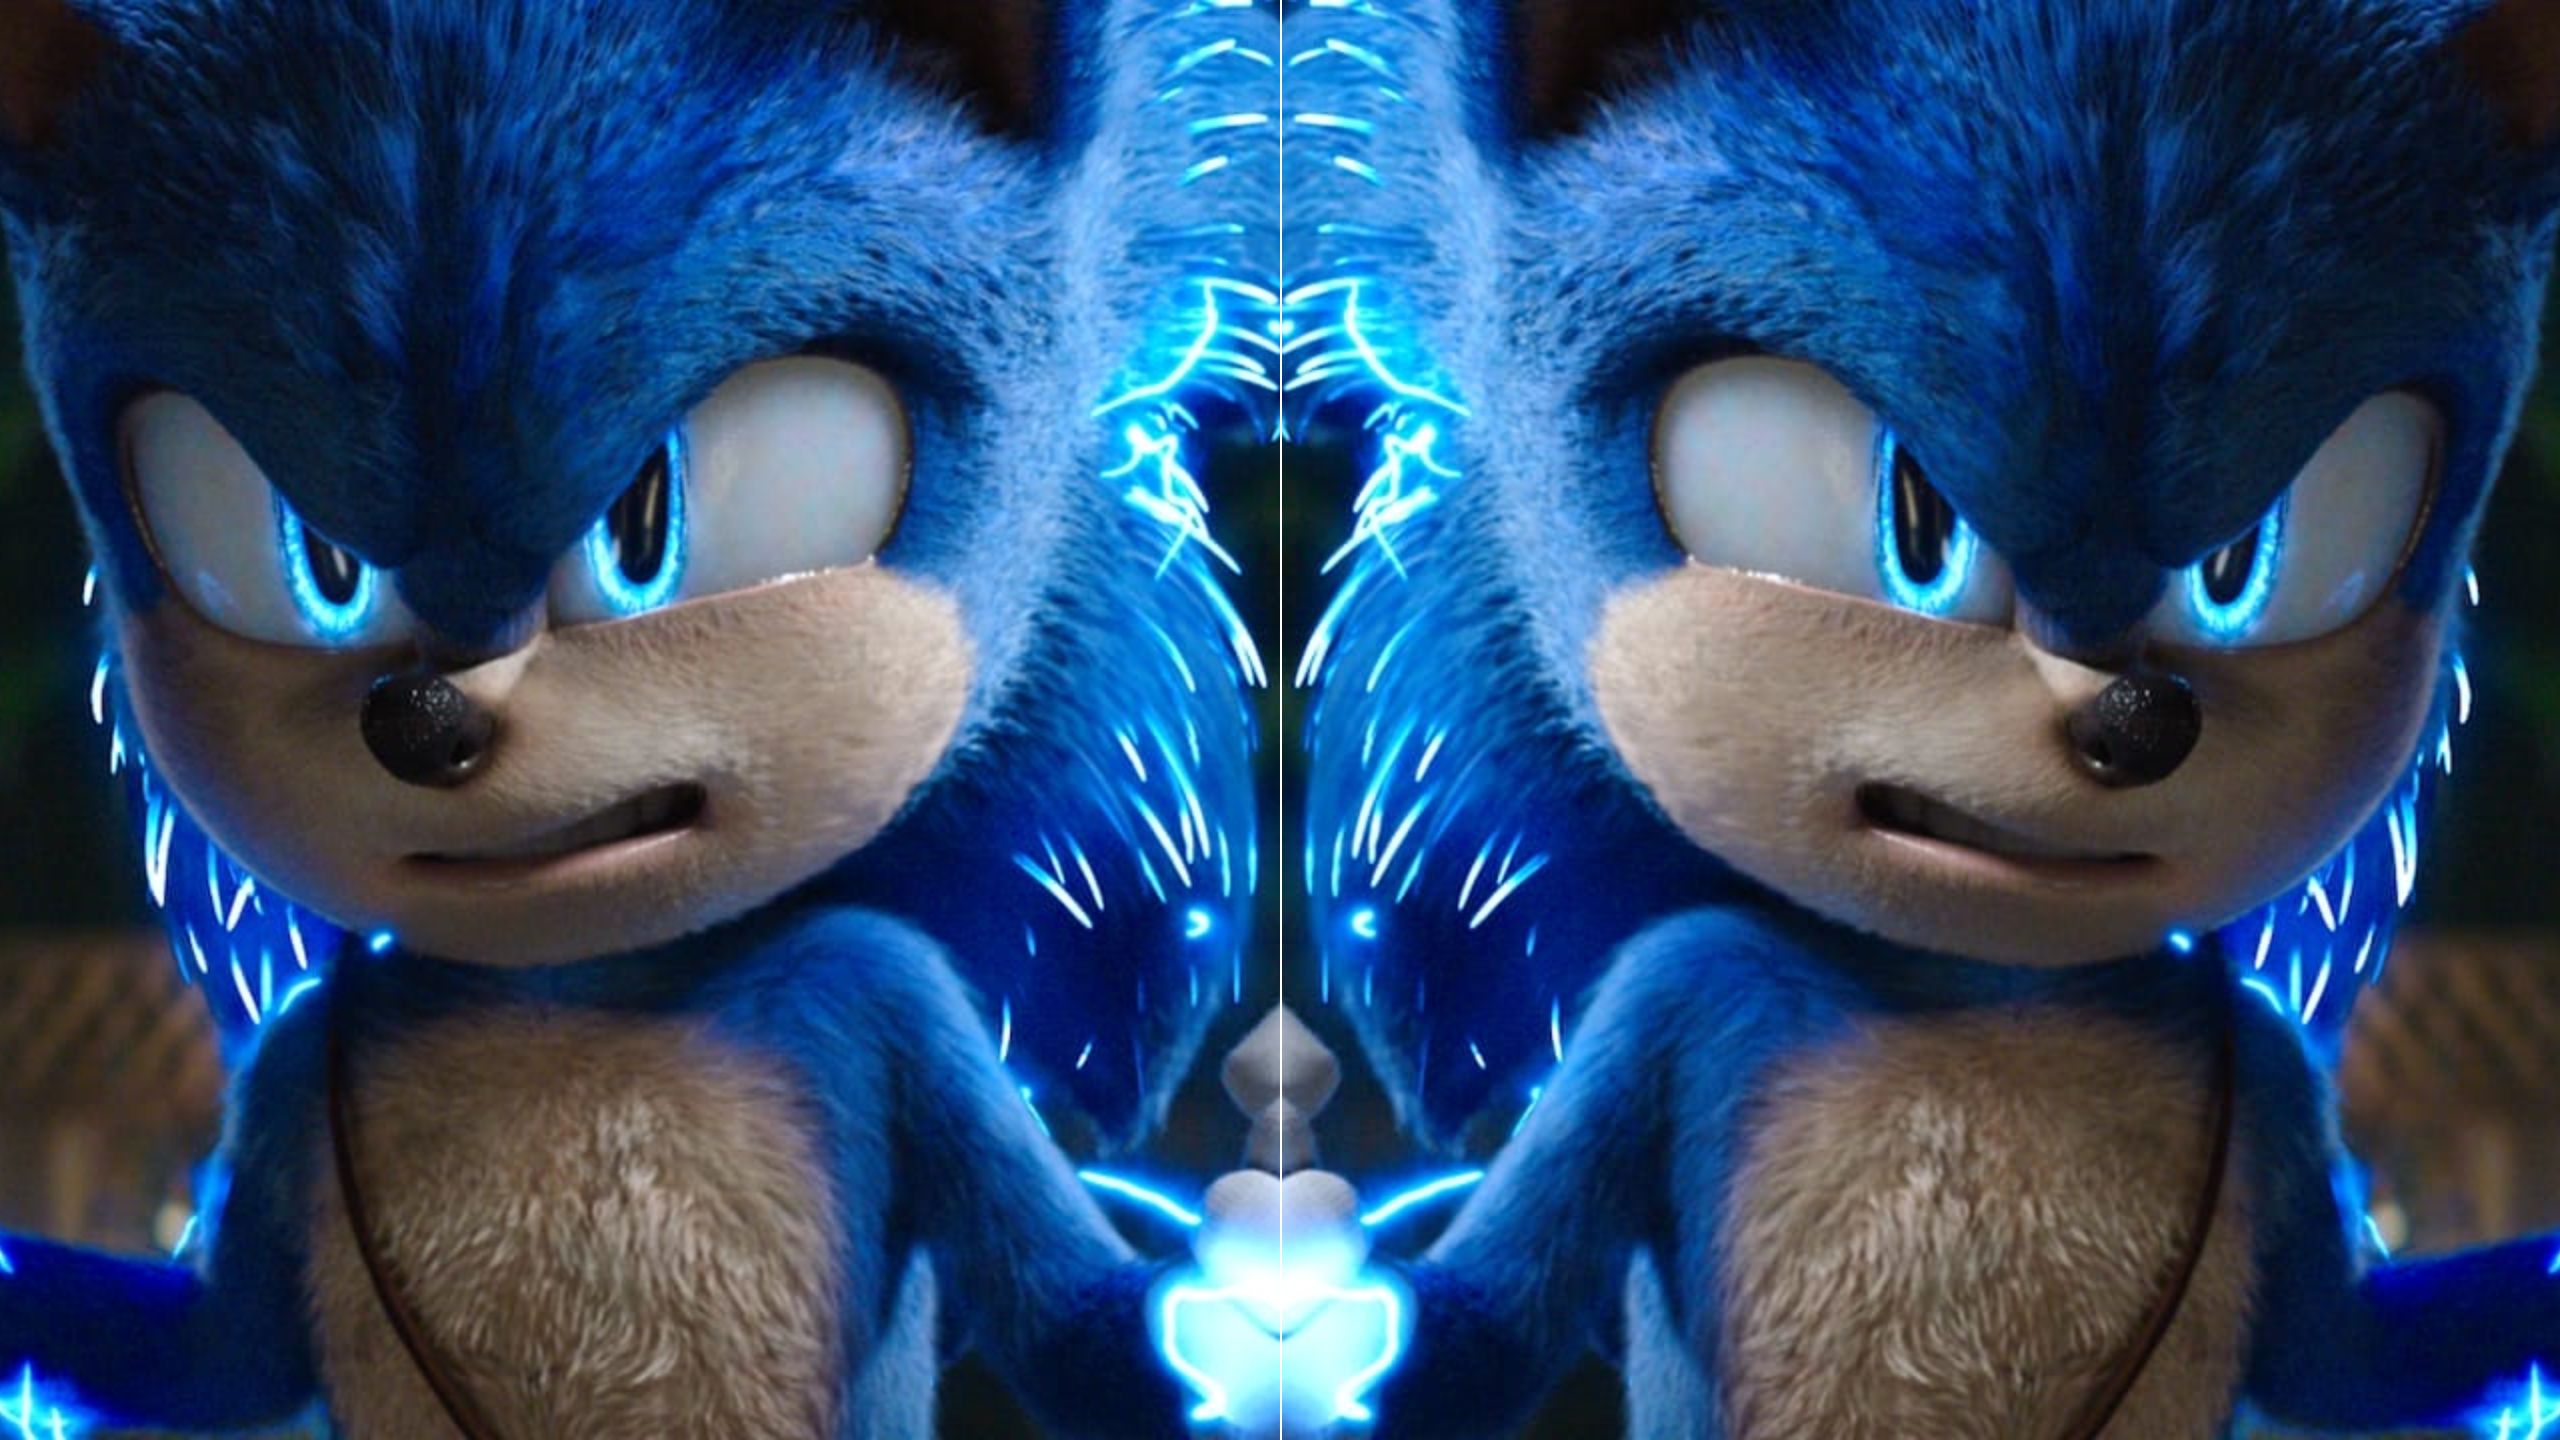 "Sonic The Hedgehog" Franchise Is Decided To Stay On Earth And Avoiding Multiverse Exploration In Next Movie